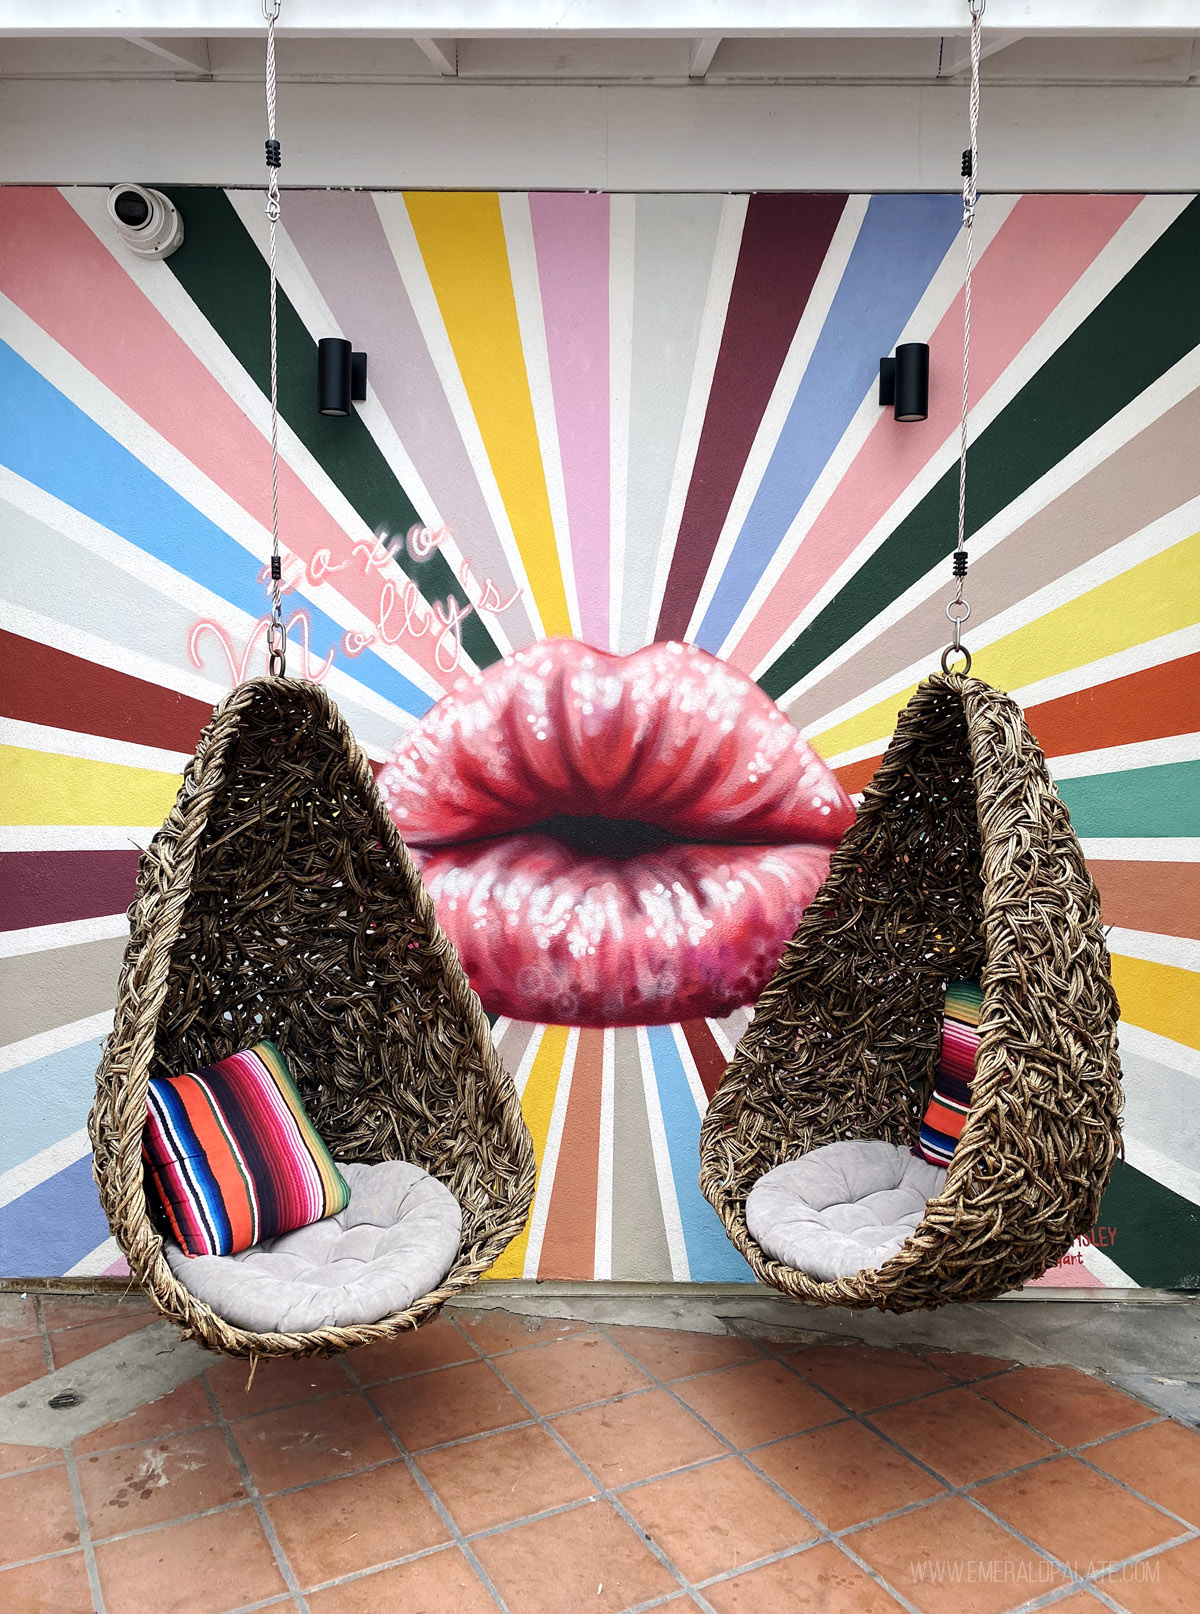 swinging pod chairs in front of a colorful mural with lips puckered in a kiss